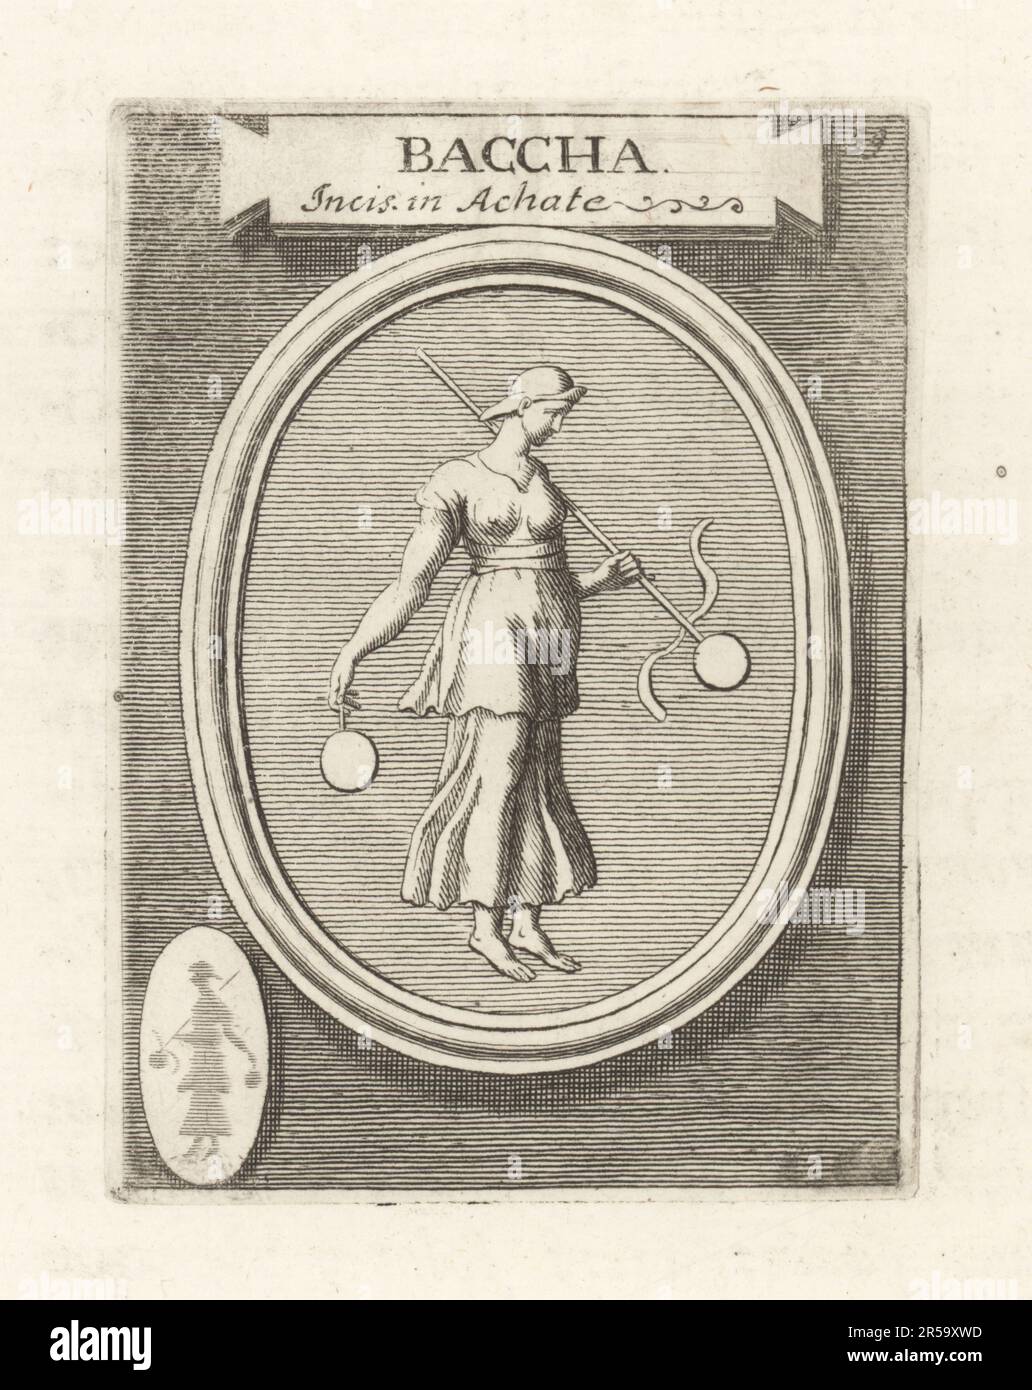 Bacchante or acolyte of Bacchus, Roman god of wine. (Fufluns Pacha in Etruscan religion.) In hat, wearing a soft purple silk tunic and skirt. From an engraved agate gem. Baccha Incis in Achate. Copperplate engraving from Francesco Valesio, Antonio Gori and Ridolfino Venuti’s Academia Etrusca, Museum Cortonense in quo Vetera Monumenta, (Etruscan Academy or Museum of Cortona), Faustus Amideus, Rome, 1750. Stock Photo